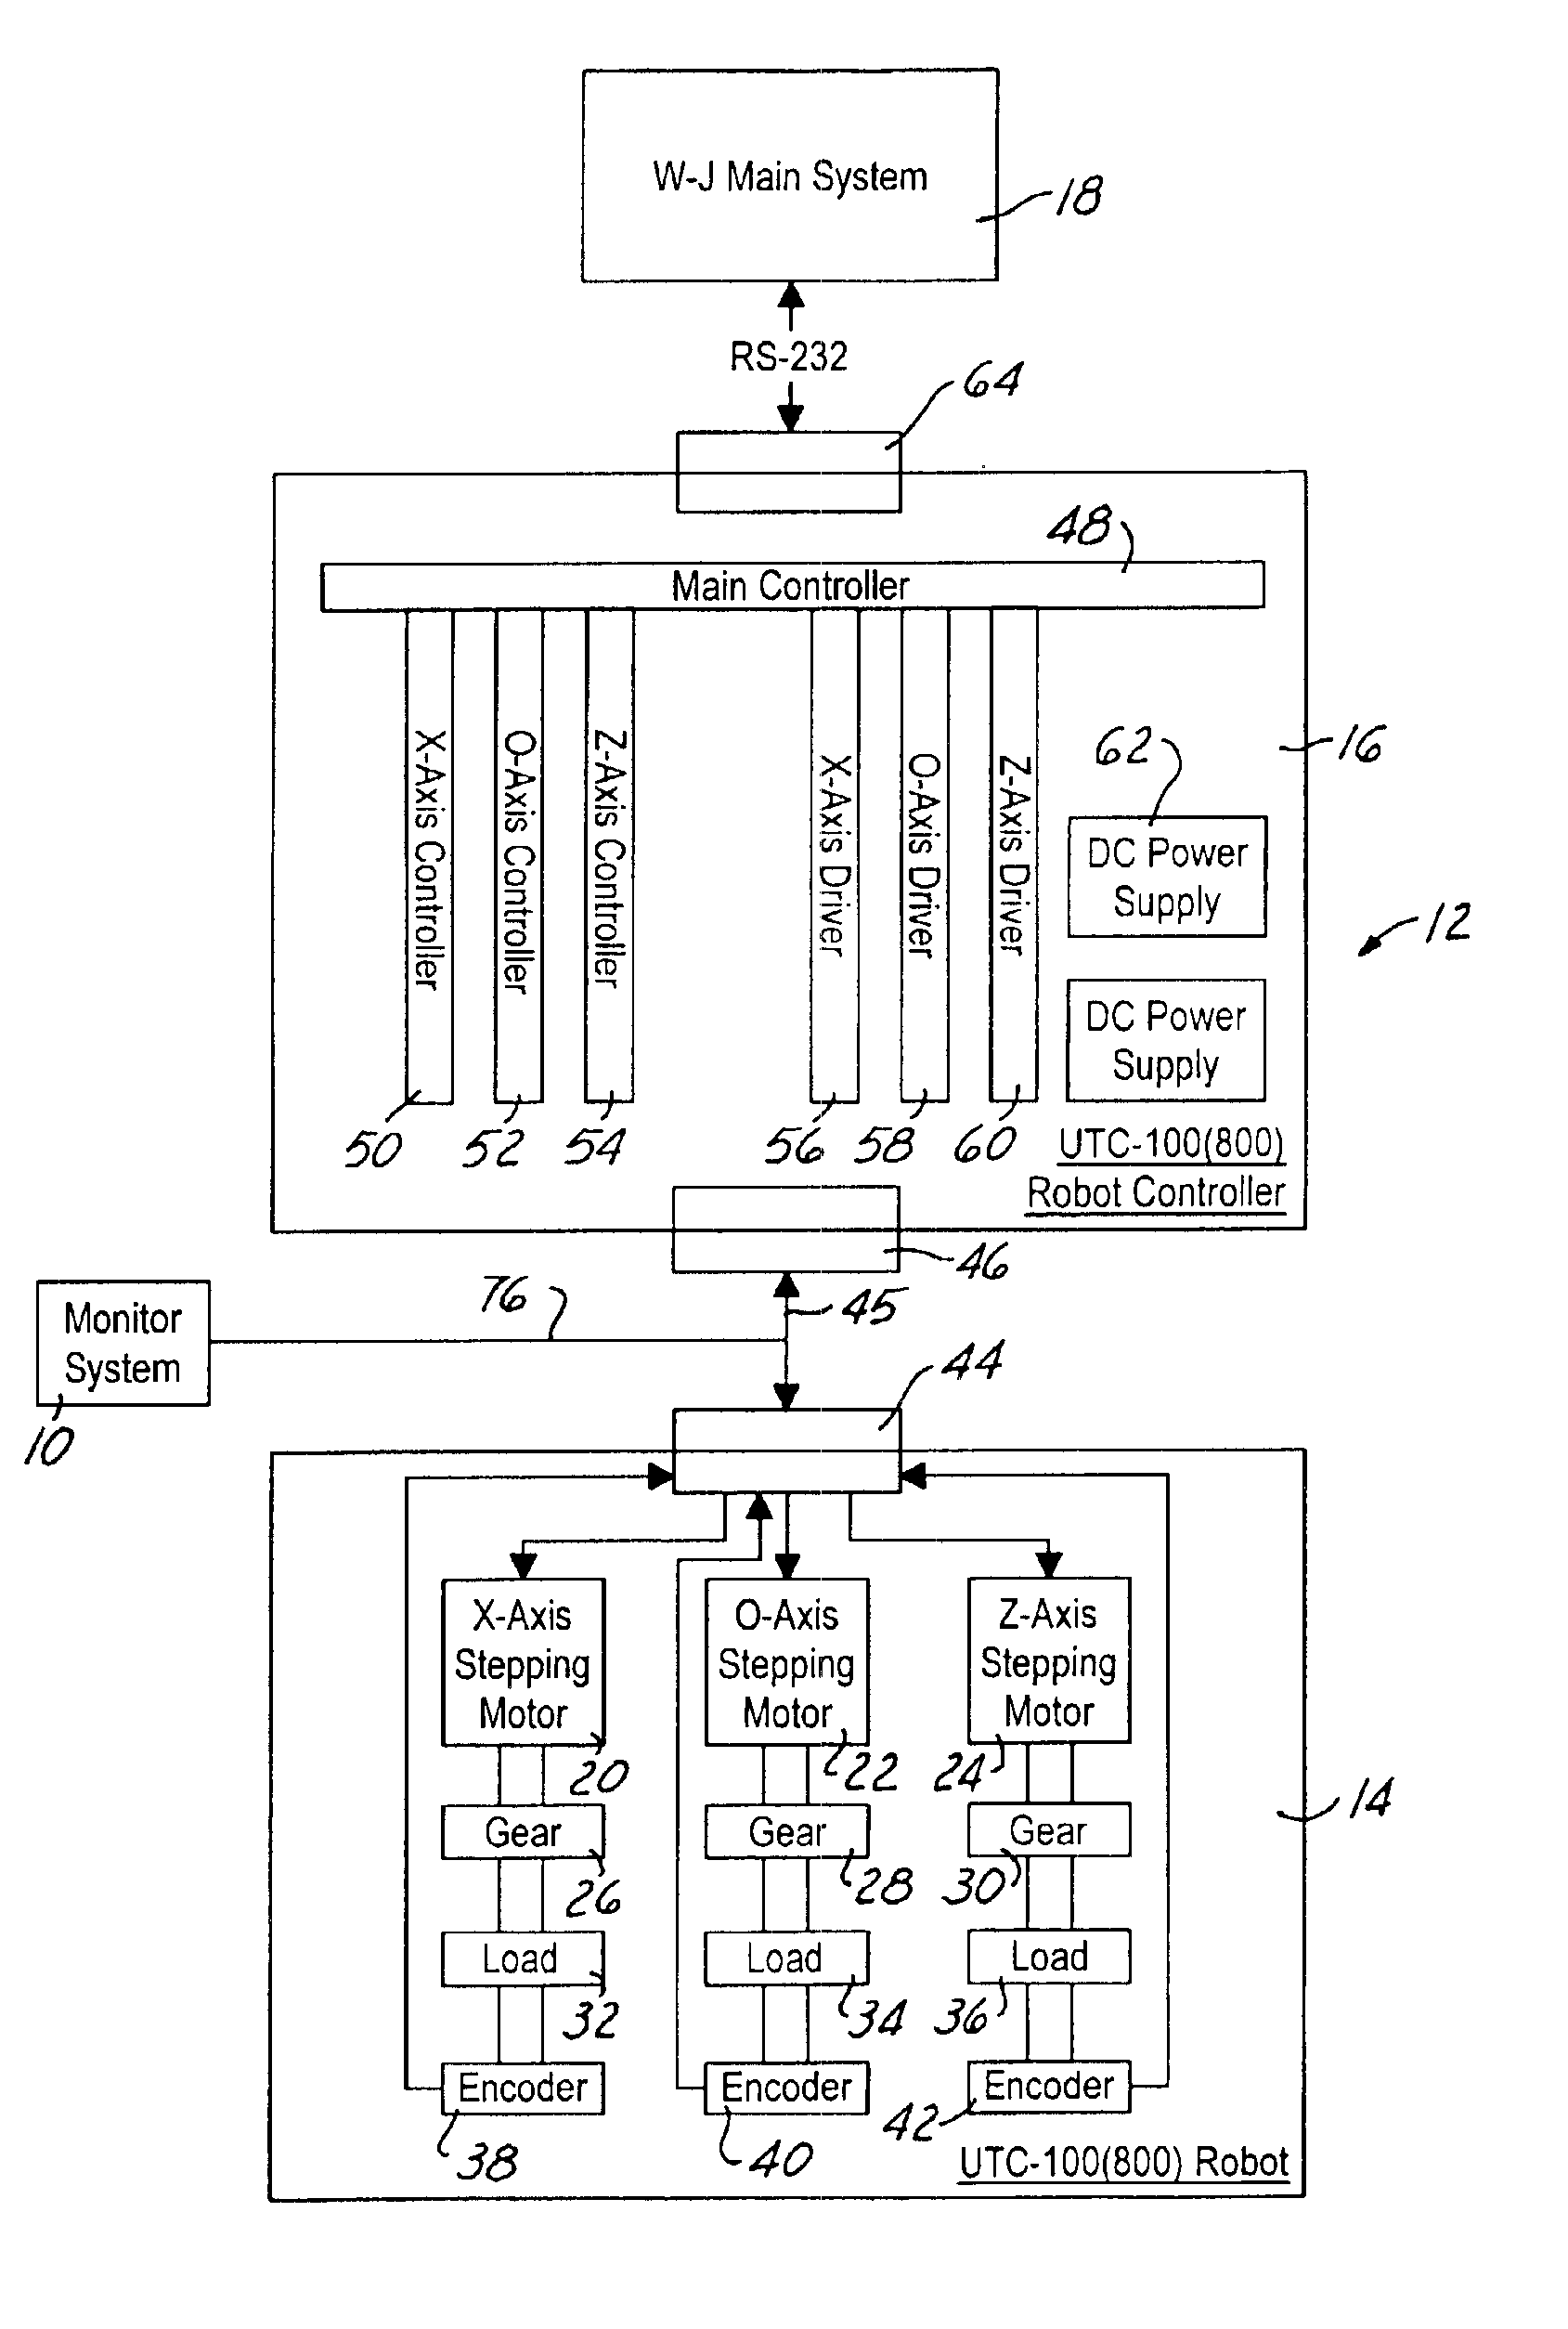 Method and apparatus for monitoring the operation of a wafer handling robot